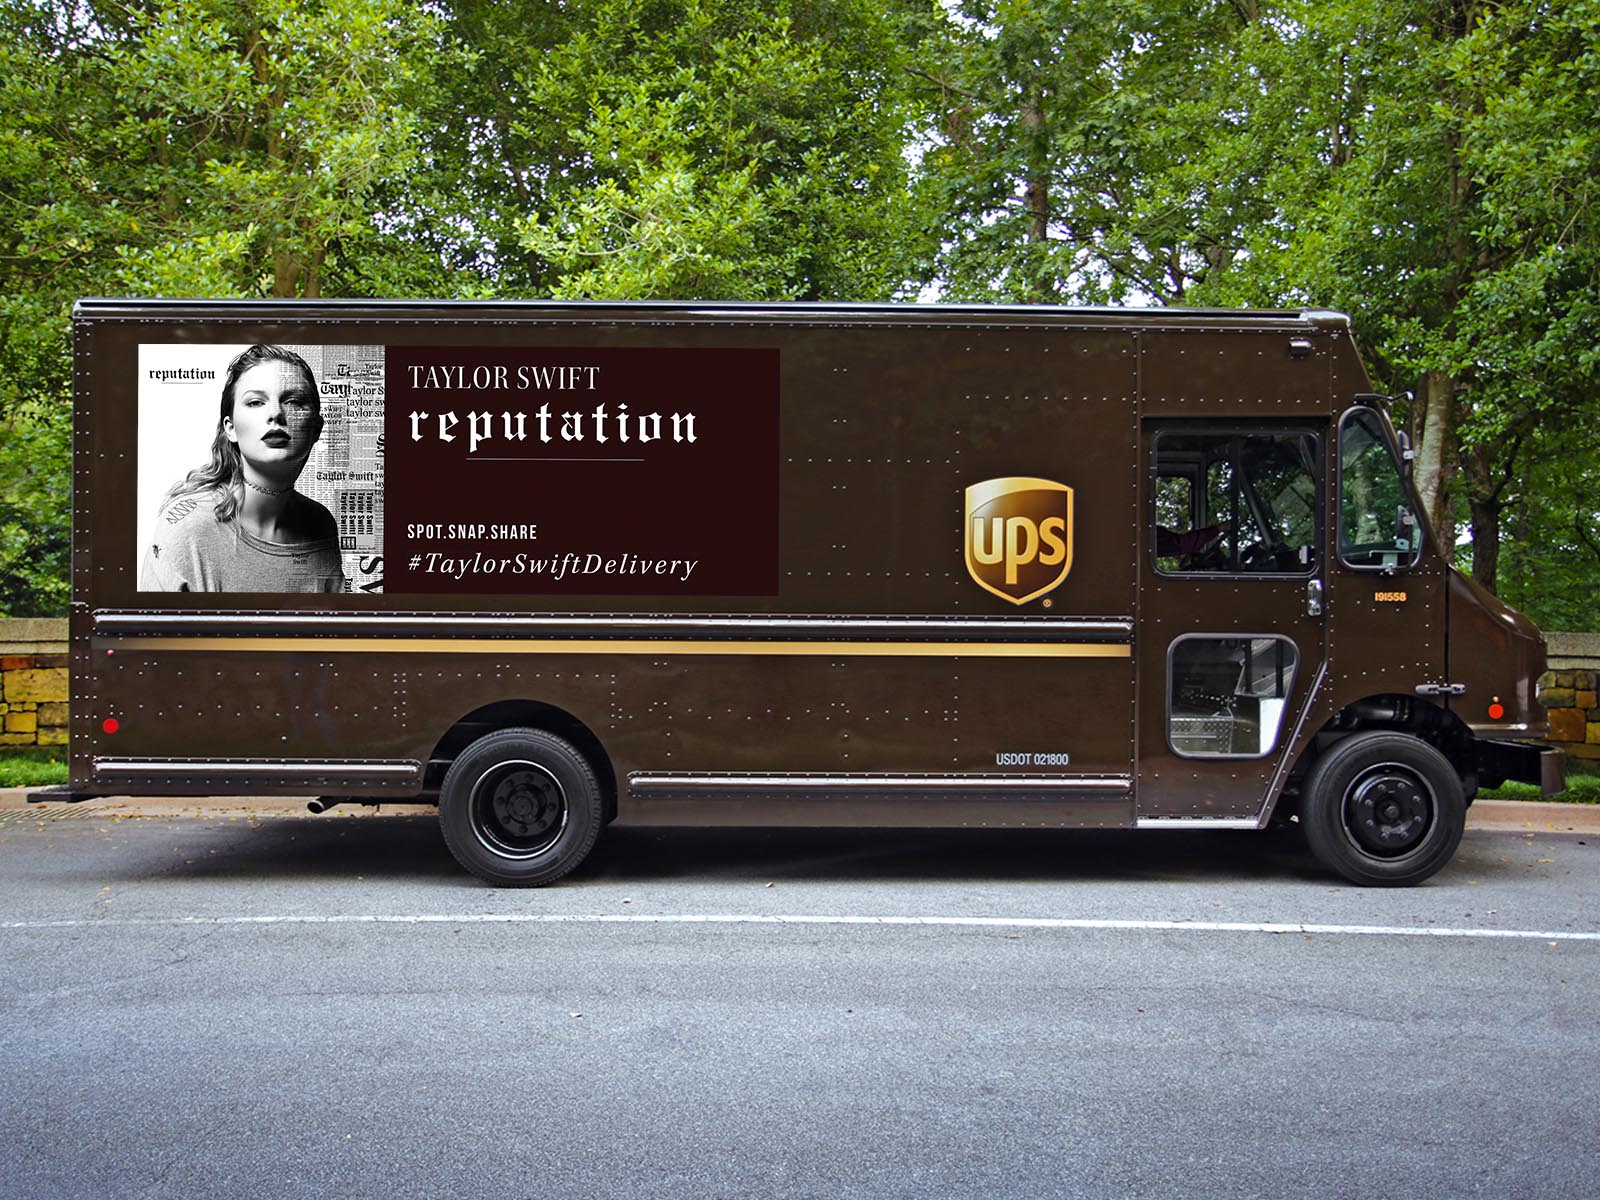 UPS as global logistics partner for Taylor Swift’s 6th album